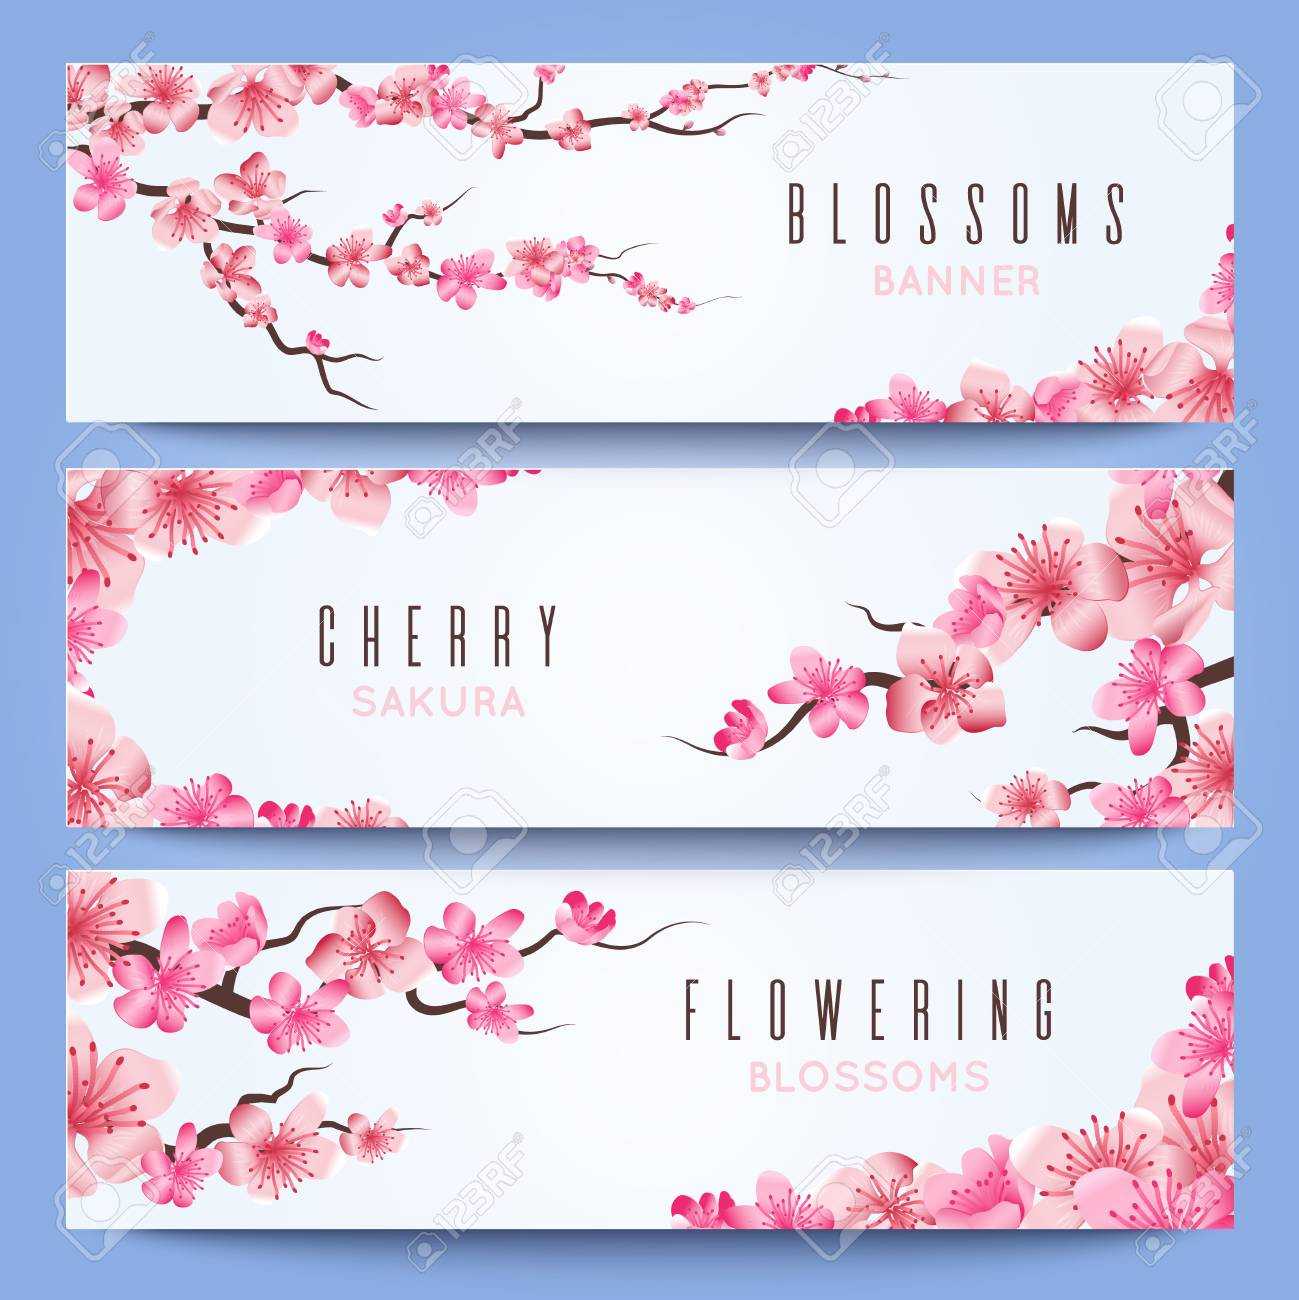 Wedding Banners Template With Spring Japan Sakura, Cherry Blossom Intended For Wedding Banner Design Templates